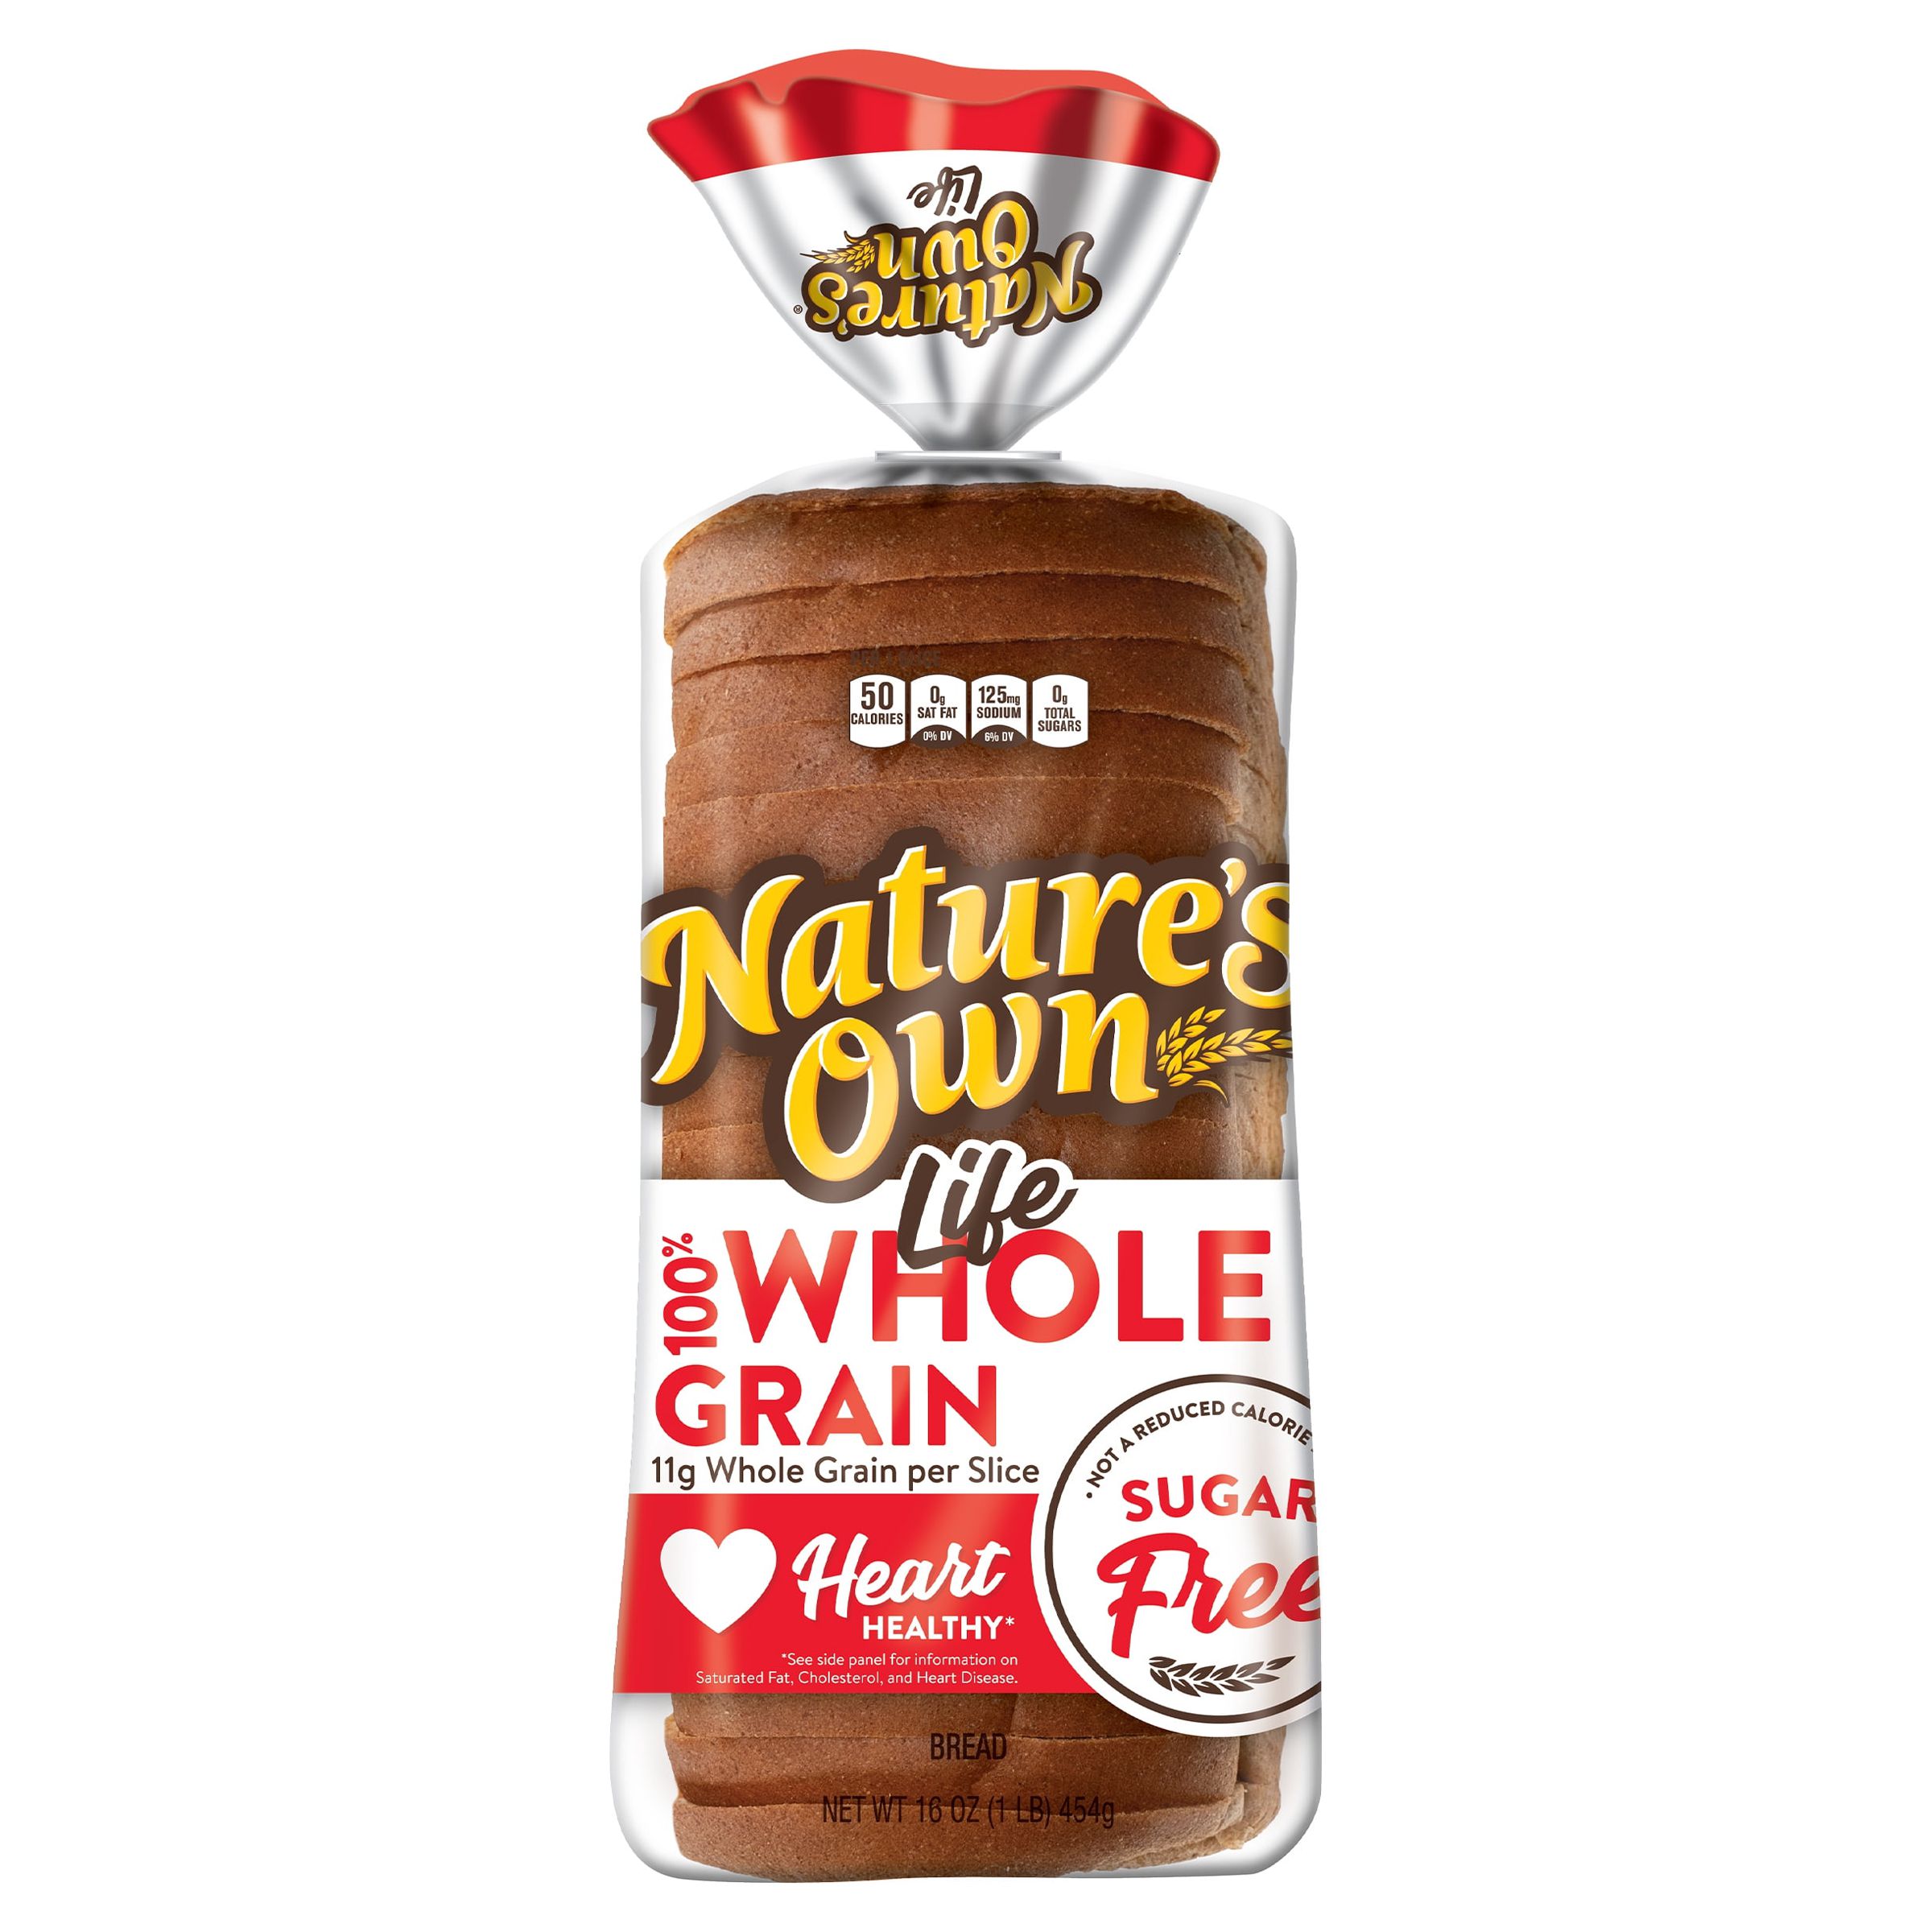 Nature's Own Life Sugar-Free 100% Whole Grain Bread Loaf, 16 oz - image 1 of 15